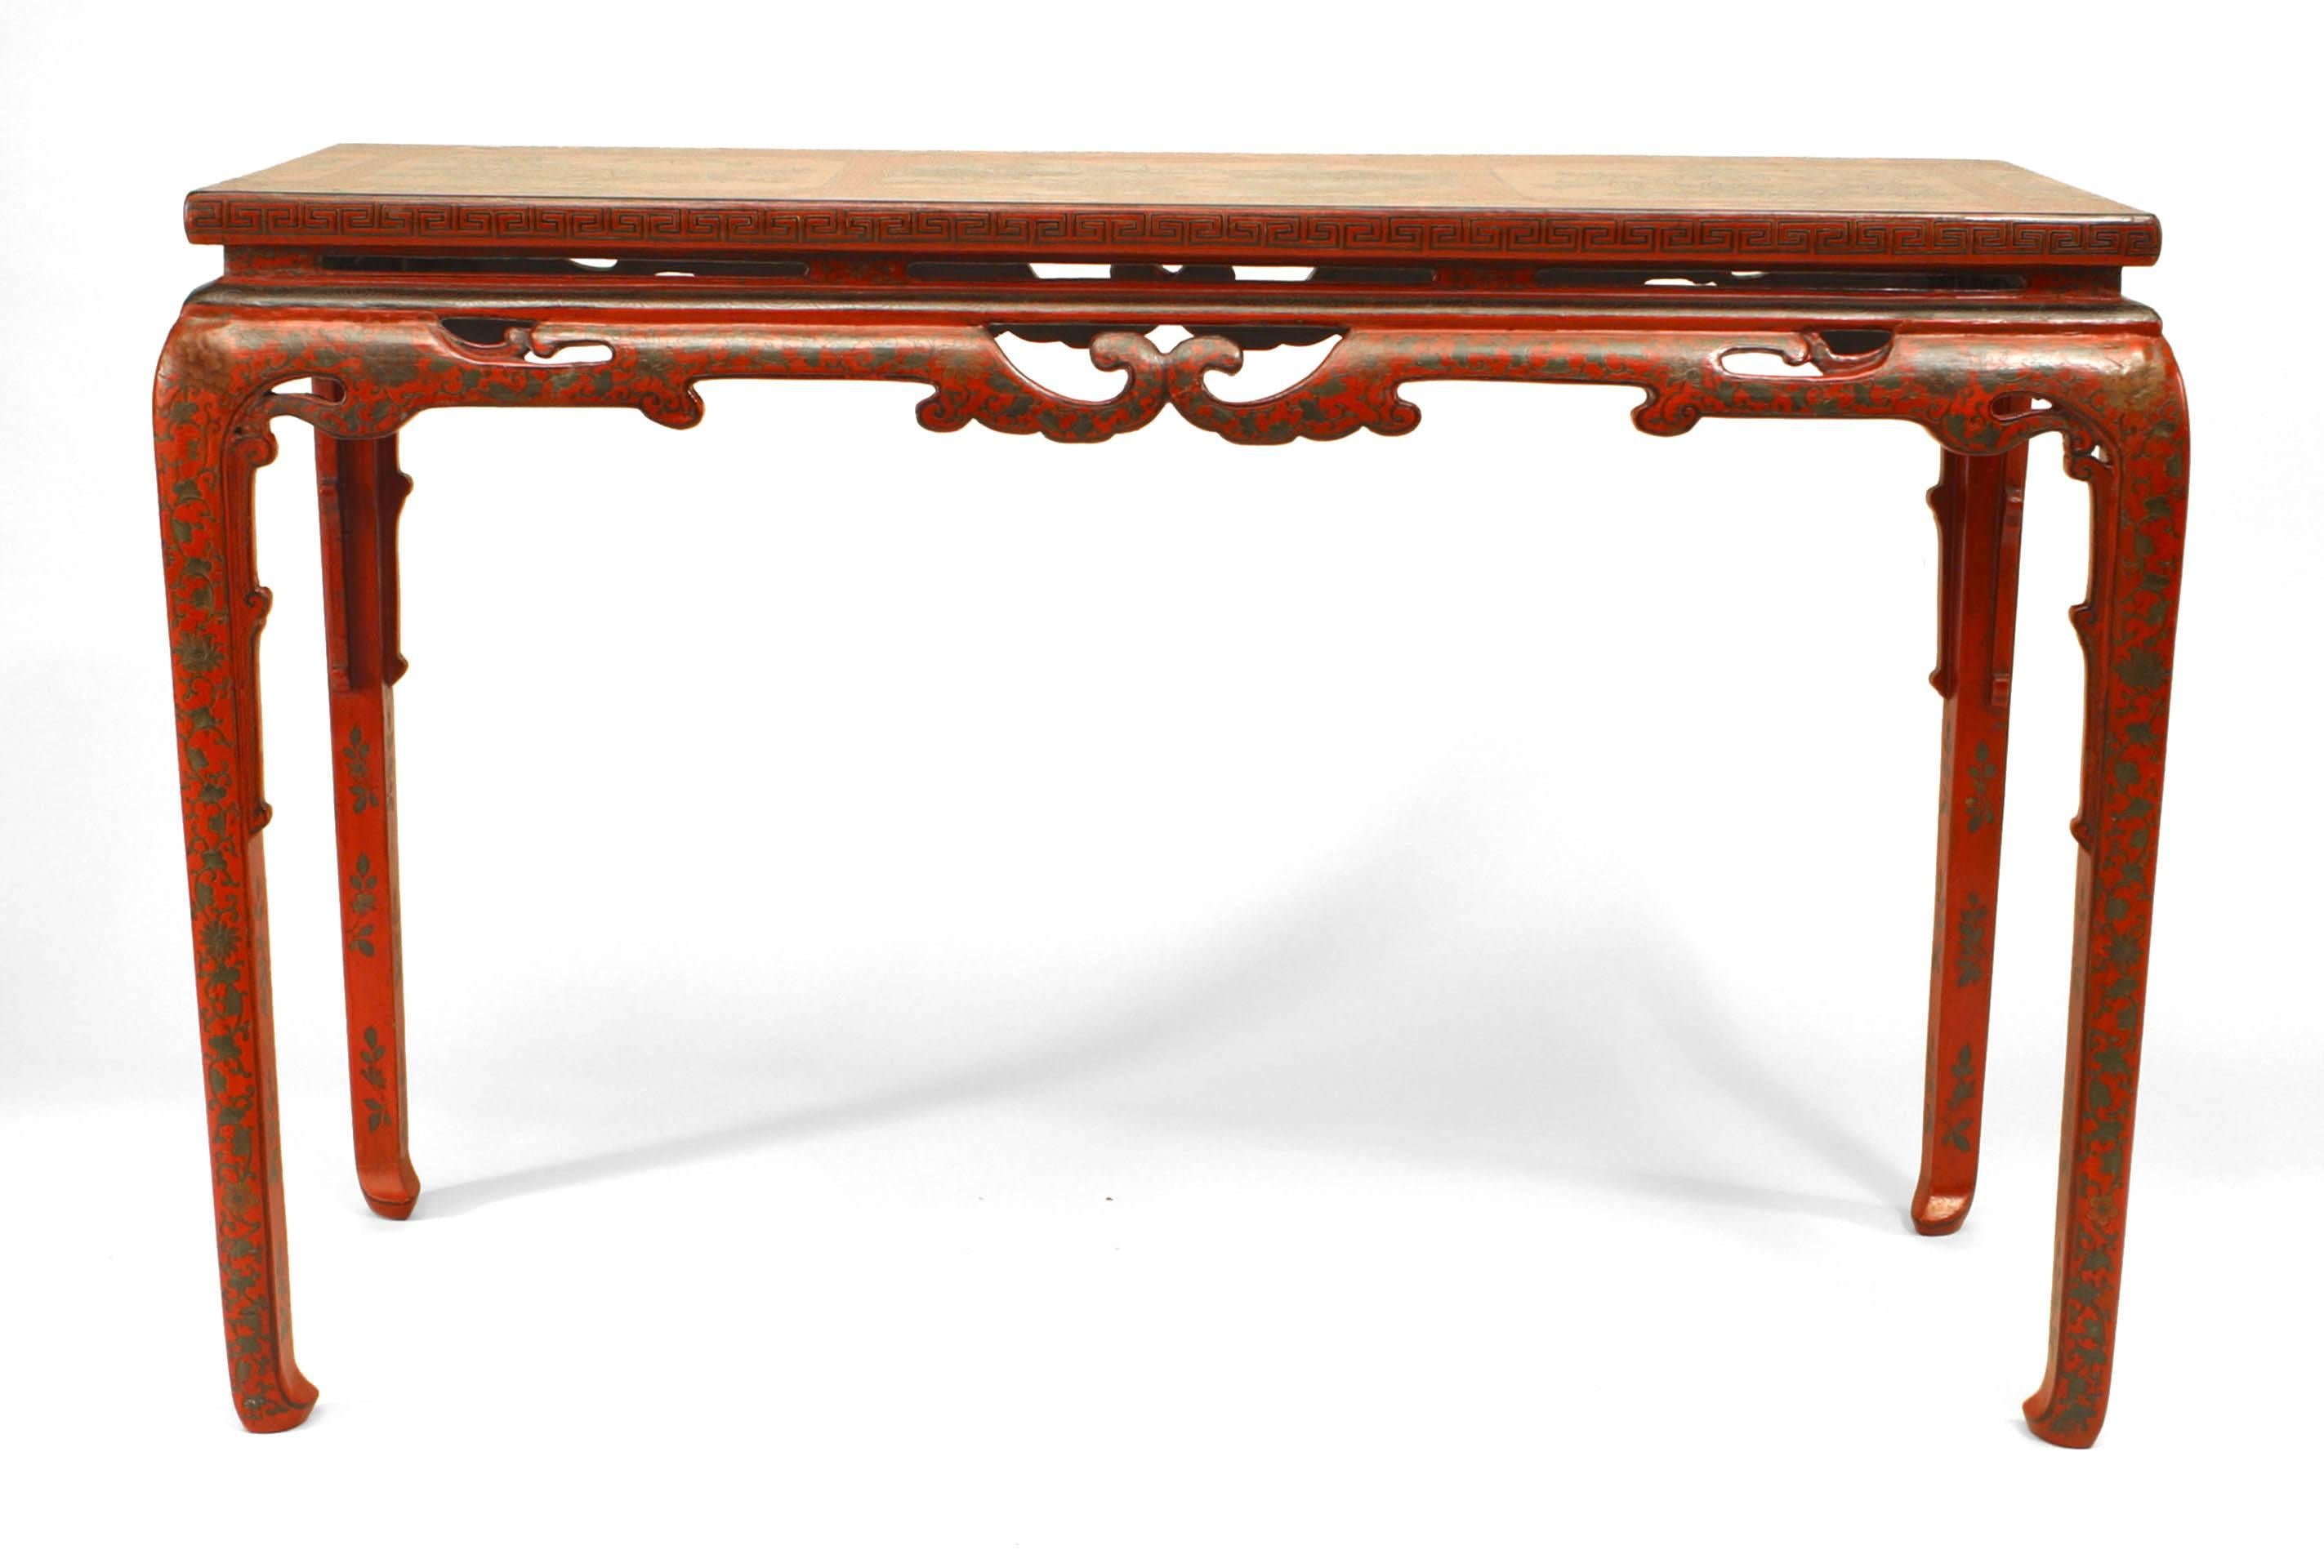 Chinese console table dating to the eighteenth or nineteenth century. The table features a red lacquer surface decorated with floral and bird motifs as well as floral design legs and a cut-out design apron.